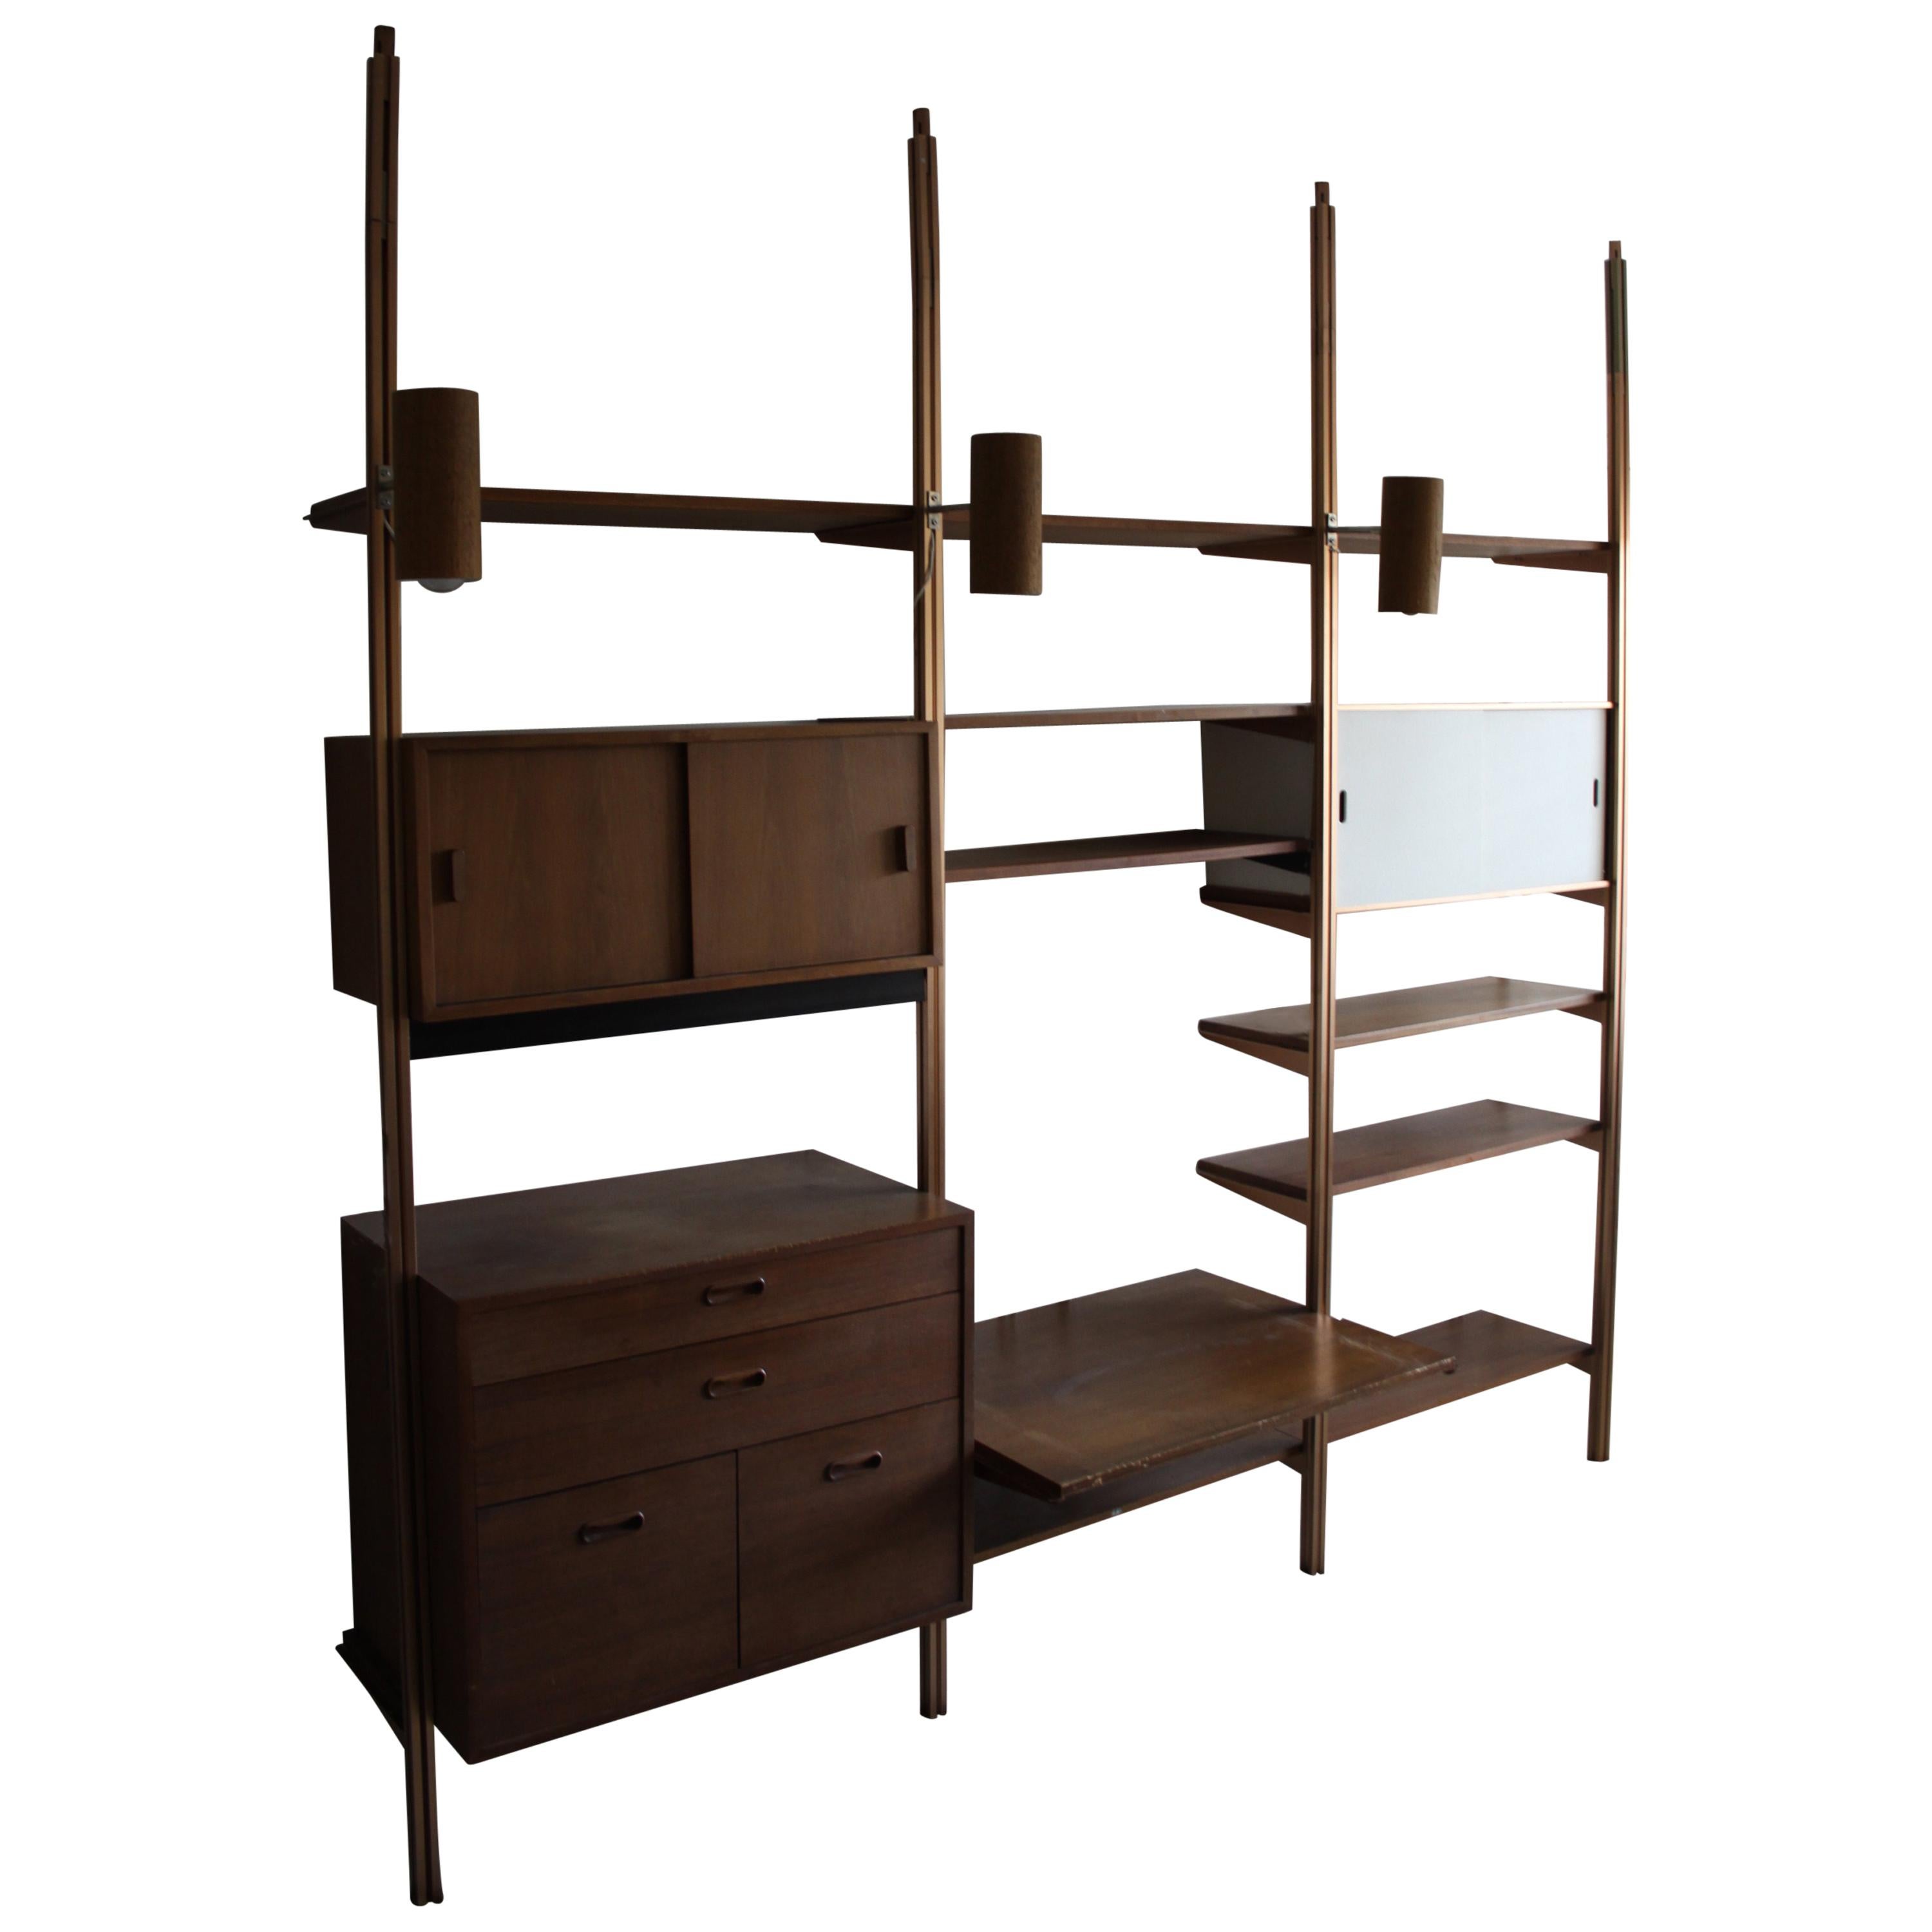 George Nelson Mid-Century Storage Wall Unit Bookcase for Omni